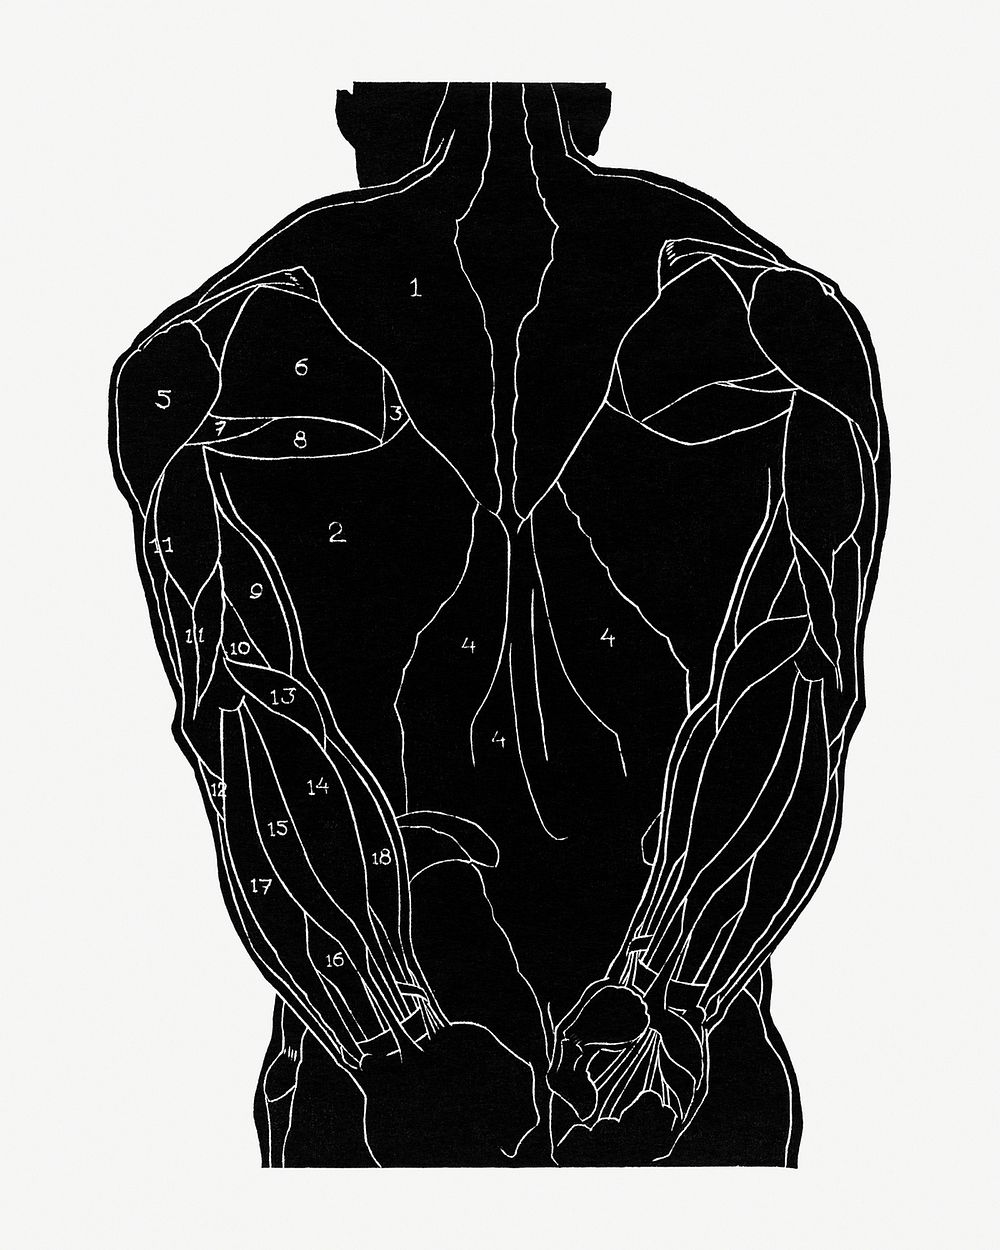 Man&rsquo;s back muscles psd human anatomy, remixed from artworks by Reijer Stolk